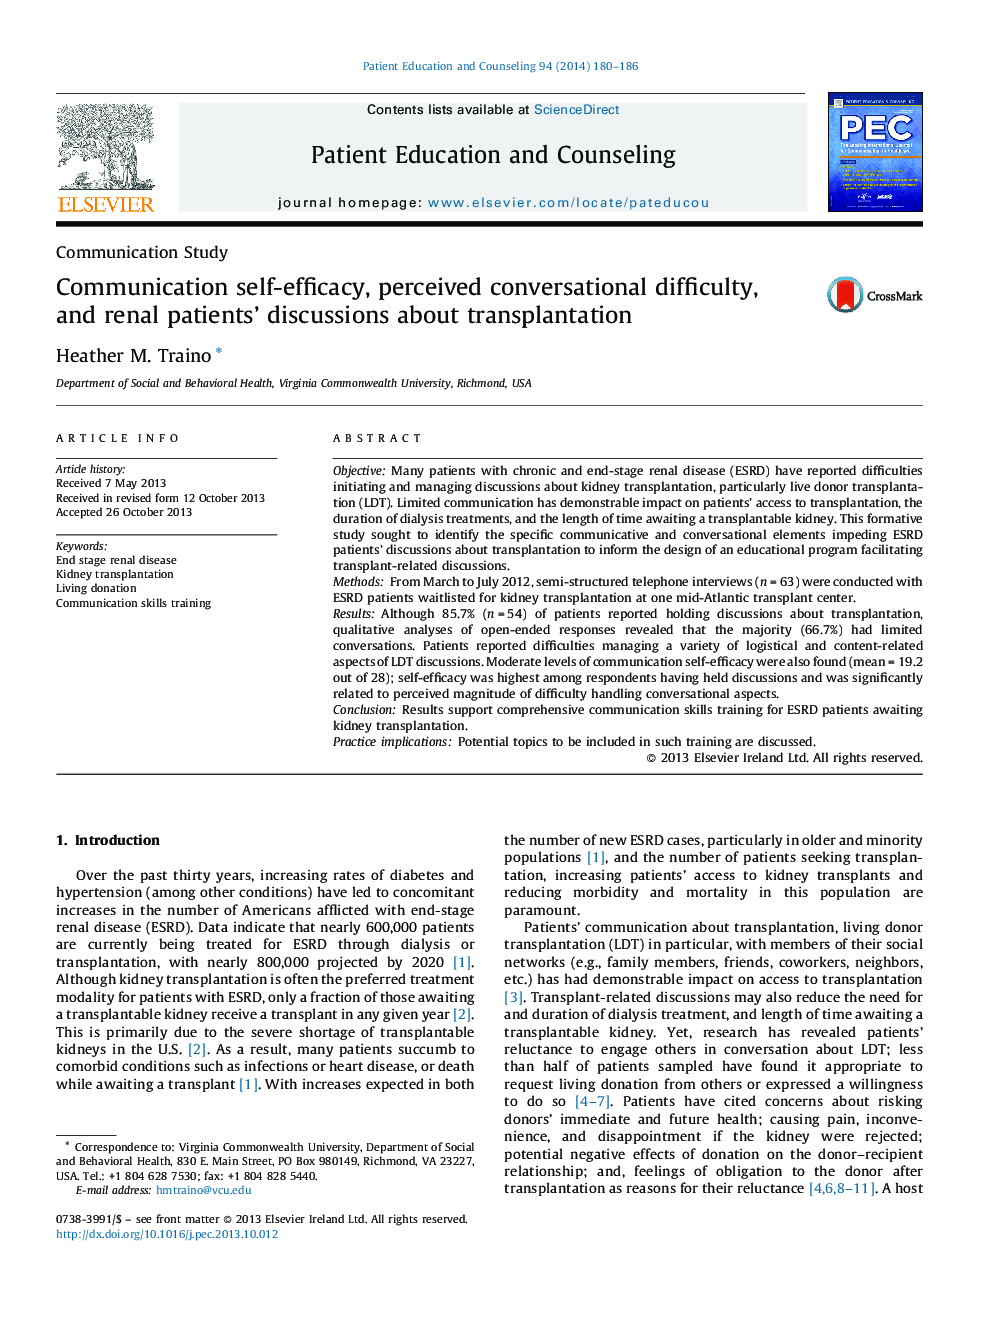 Communication self-efficacy, perceived conversational difficulty, and renal patients’ discussions about transplantation